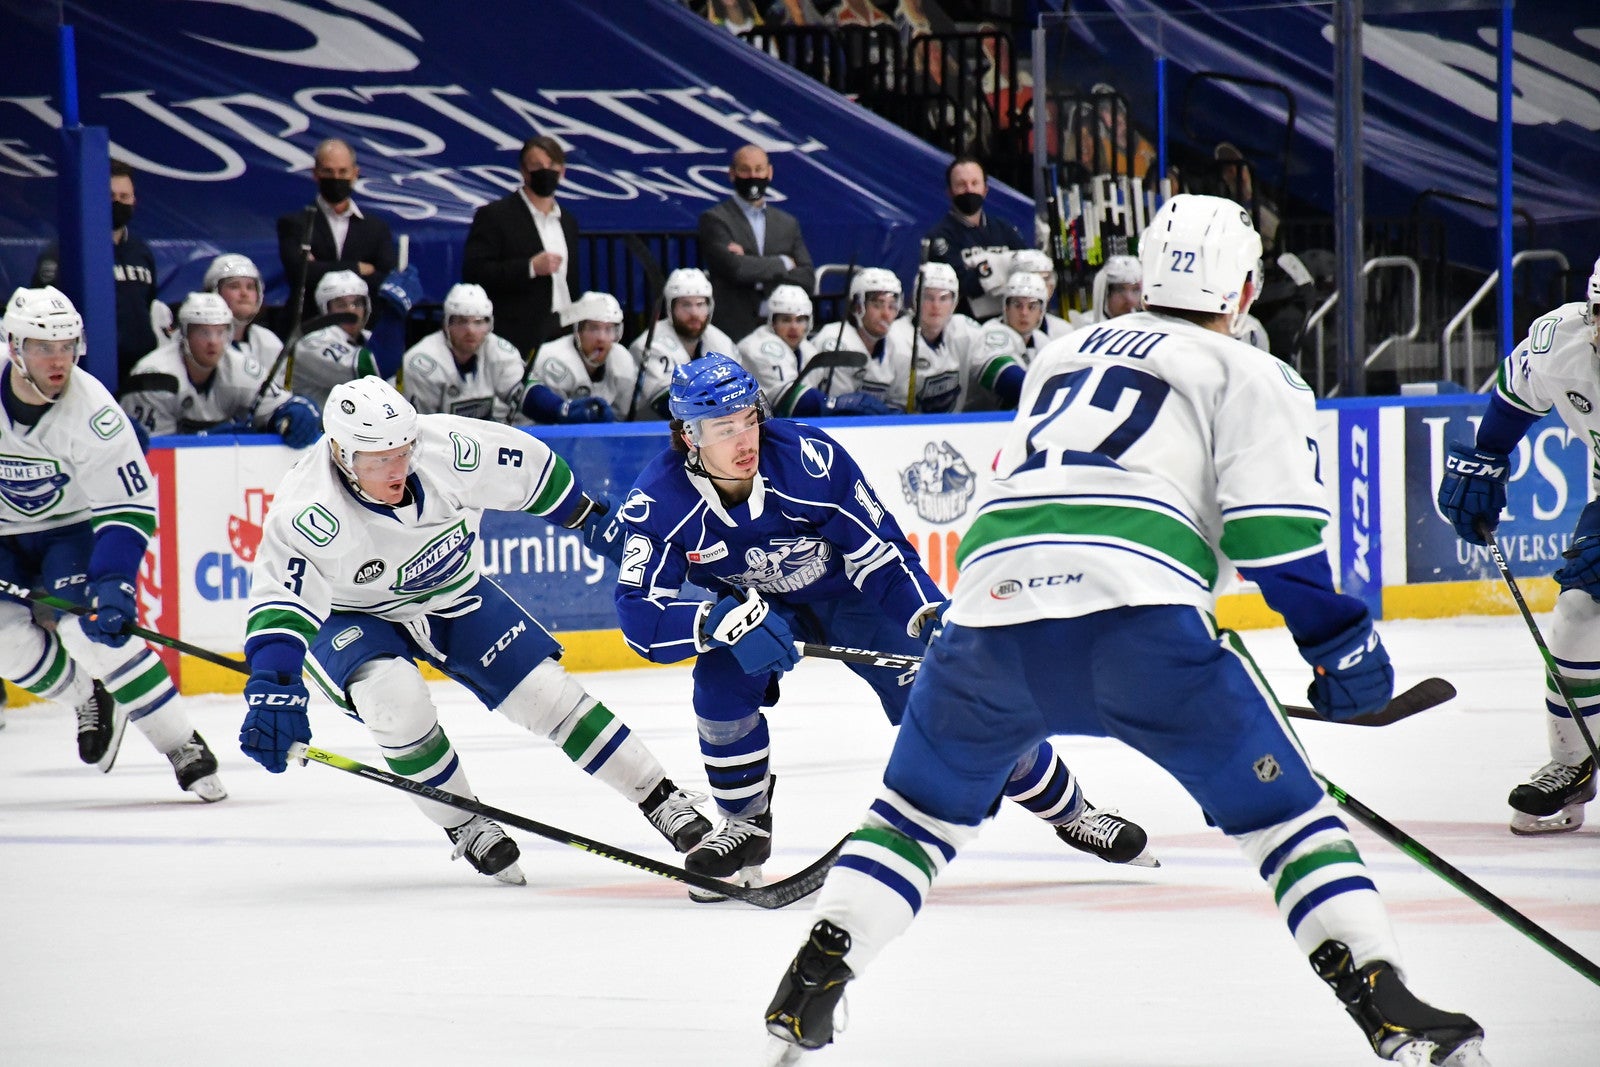 COMETS STUMBLE IN ROAD LOSS TO CRUNCH